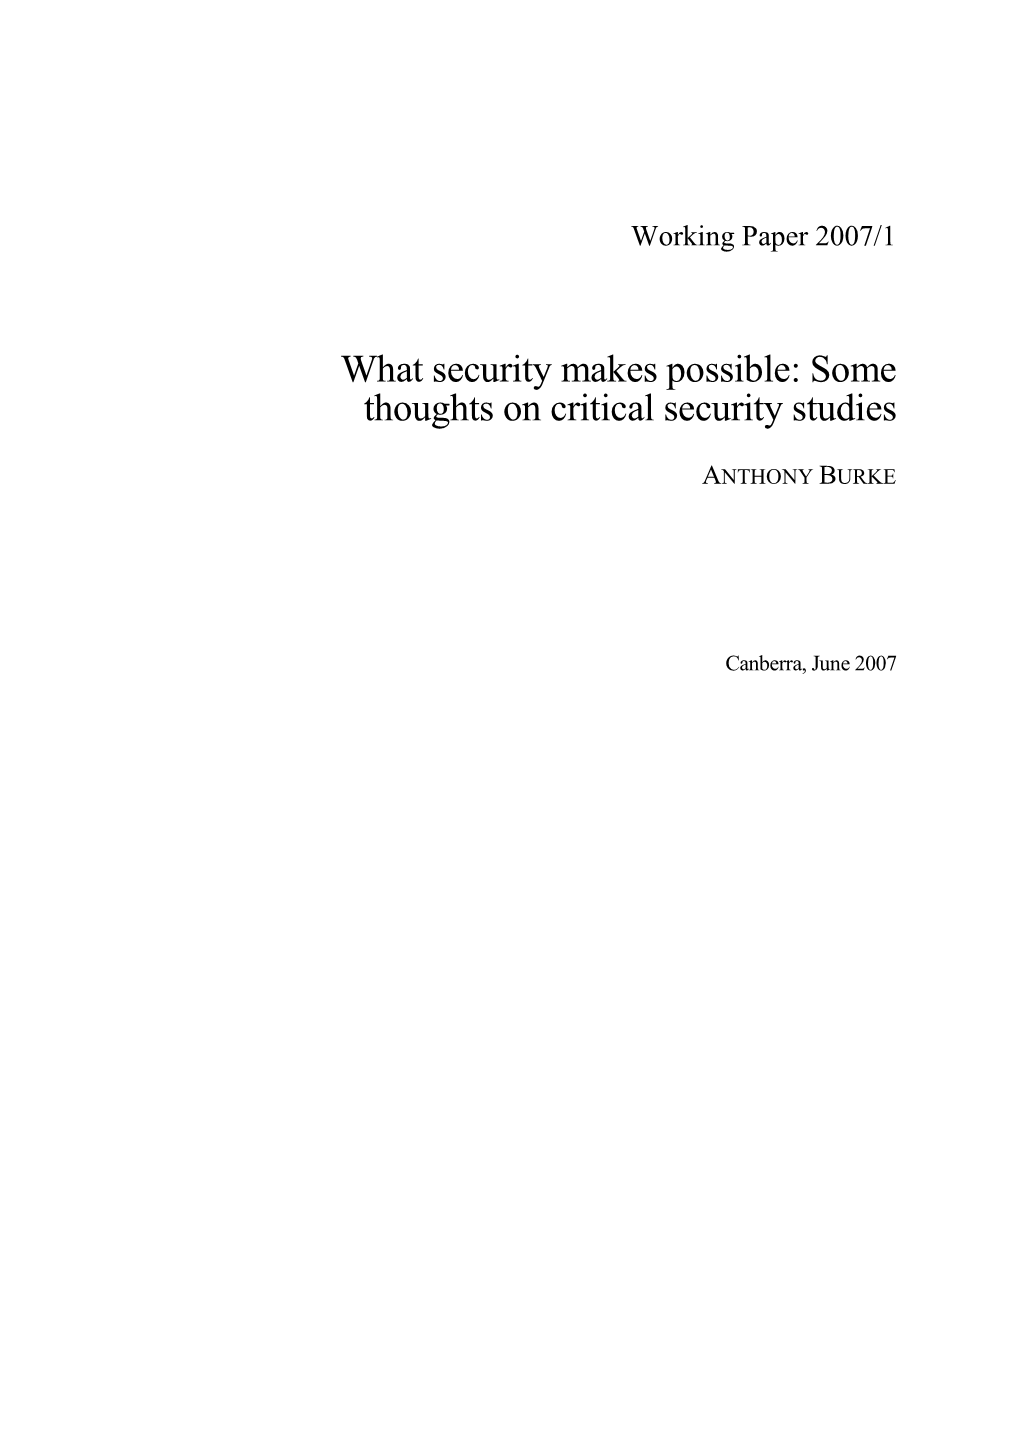 Some Thoughts on Critical Security Studies